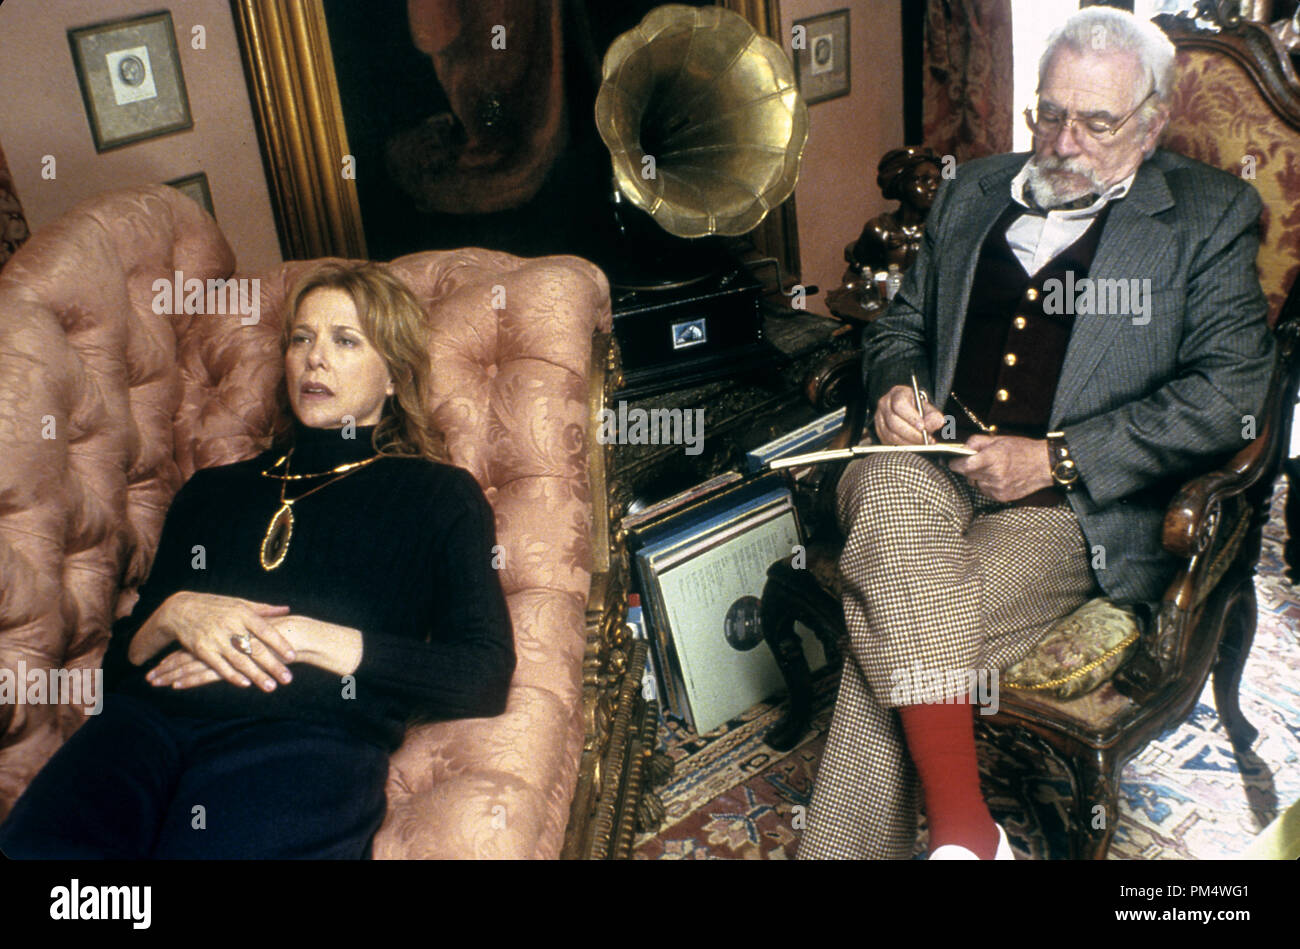 Film Still / Publicity Still from 'Running with Scissors' Annette Bening, Brian Cox © 2006 TriStar Pictures Photo Credit: Suzanne Tenner   File Reference # 30737215THA  For Editorial Use Only -  All Rights Reserved Stock Photo